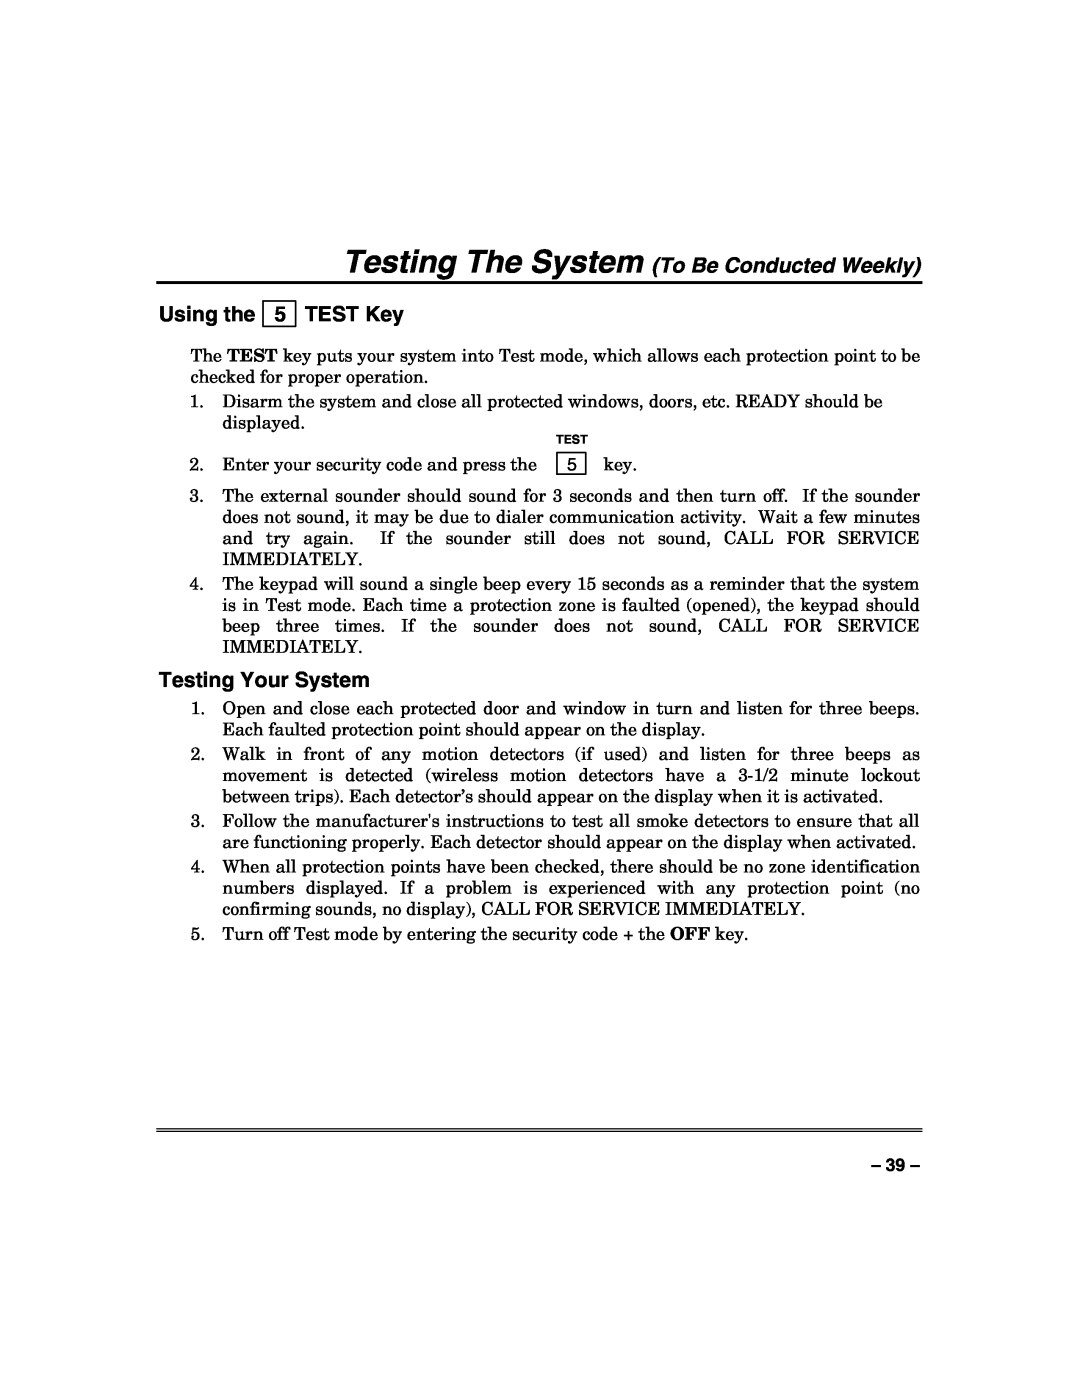 Honeywell N7003V3 manual Testing The System To Be Conducted Weekly, TEST Key, Testing Your System, Using the 